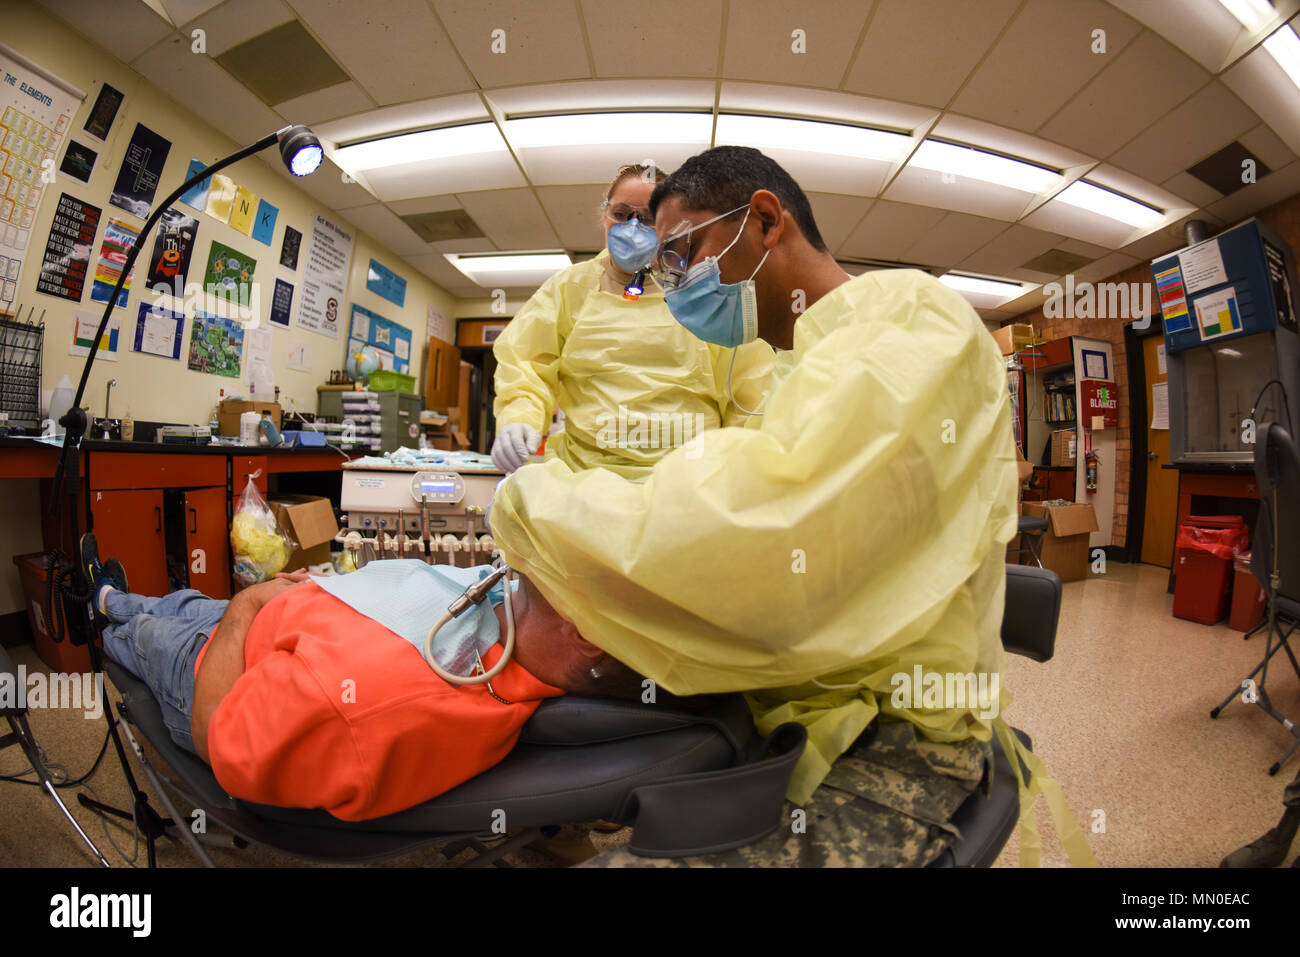 Army Capt. Shyam Shivareddy, a dentist assigned to 455th Dental Company, Fort Devens Reserve Forces Training Area, Mass., fills a tooth at Swain County High School during Smoky Mountain Medical Innovative Readiness Training in Bryson City, N.C., on Aug. 3, 2017. Smoky Mountain Medical IRT provides no-cost medical, dental, vision and veterinary services to the residents of Swain County, Clay County and the surrounding areas while satisfying training requirements for active, reserve and National Guard service members and units. Stock Photo